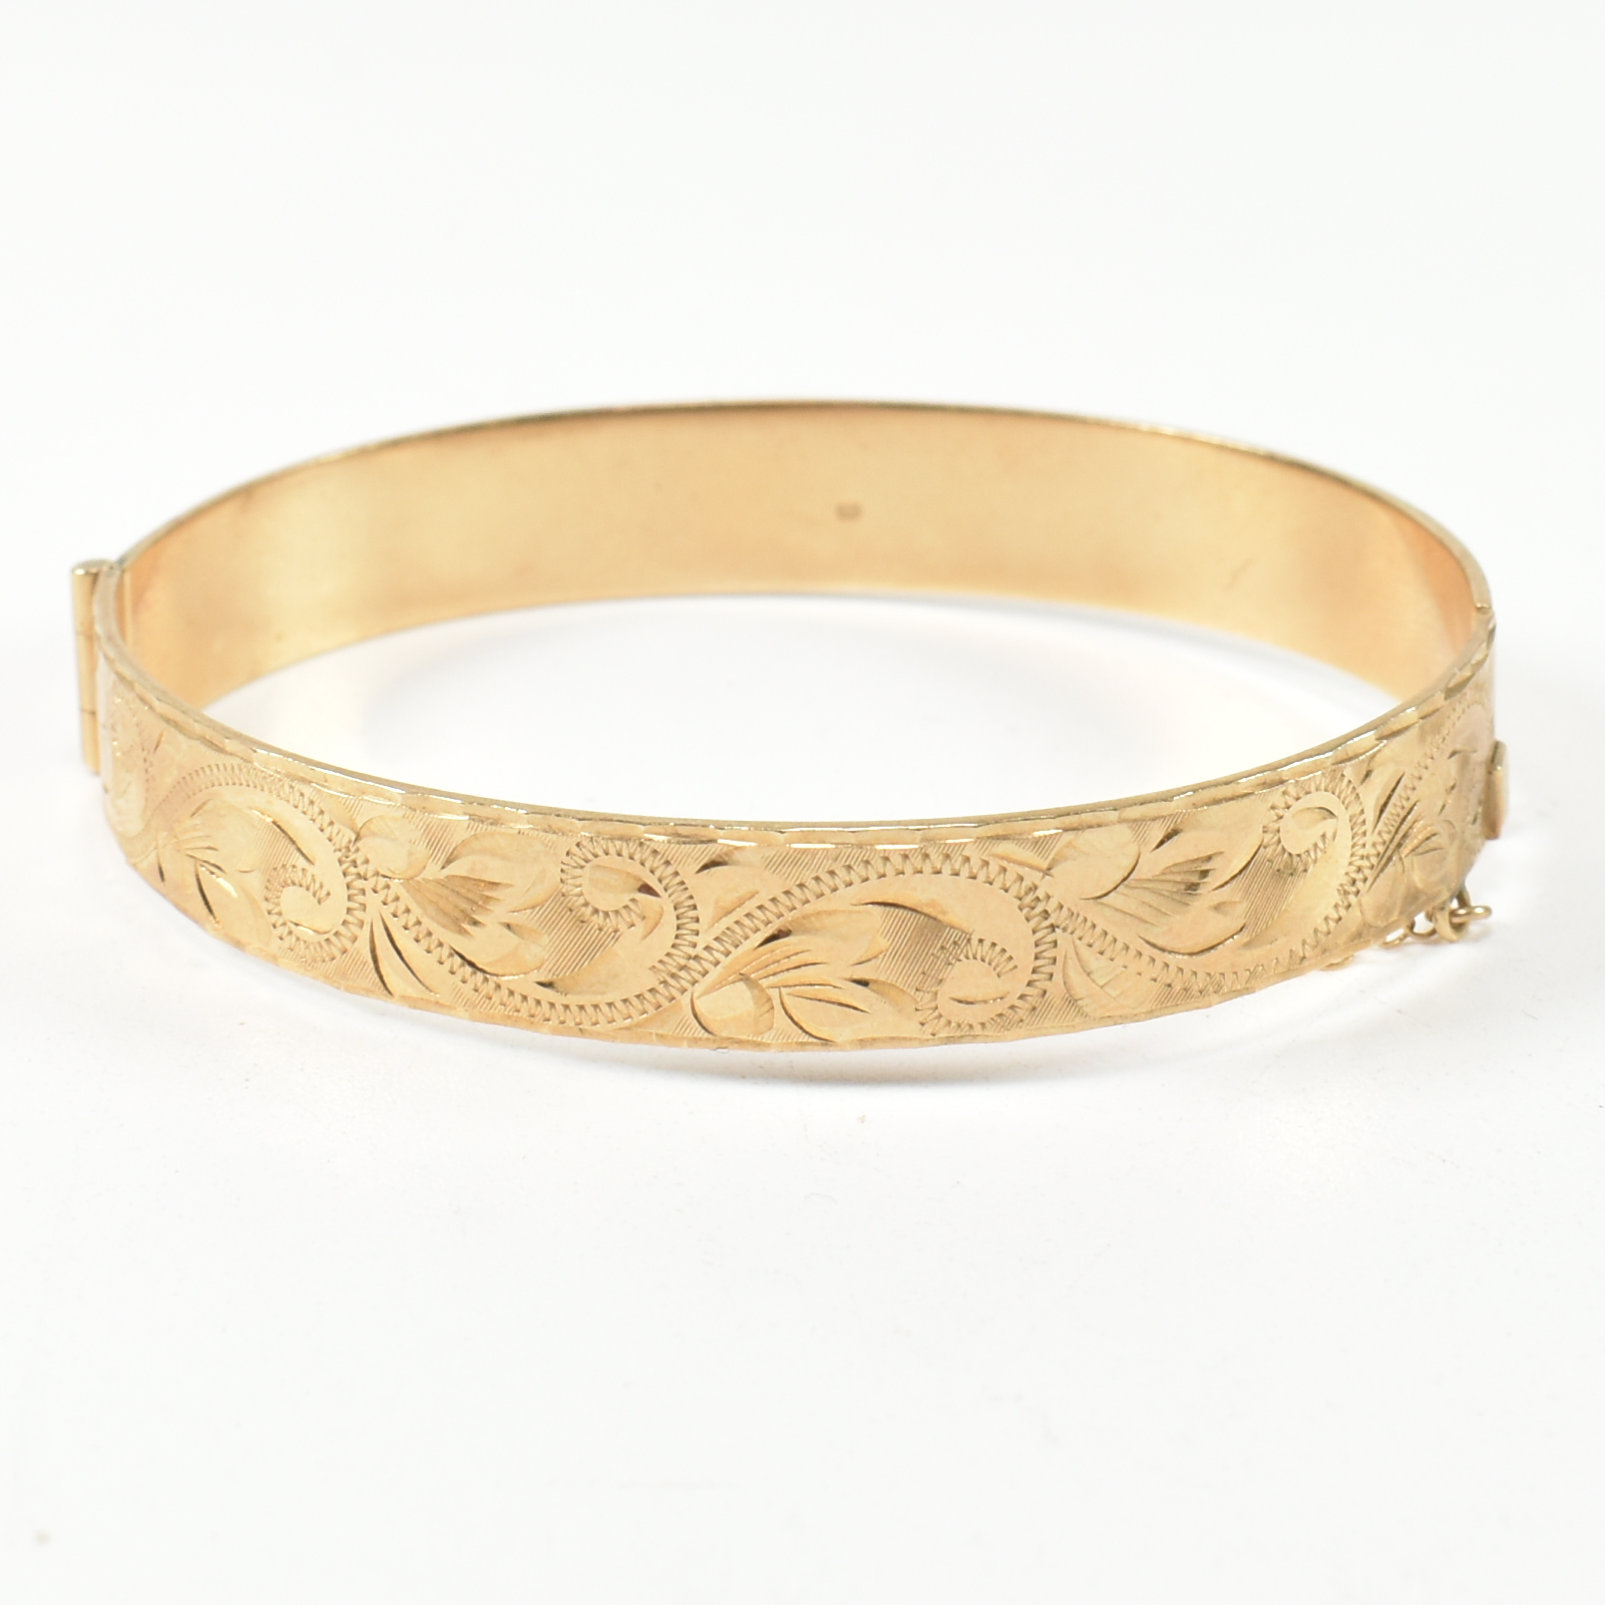 HALLMARKED 9CT GOLD HINGED BANGLE & A PAIR OF 9CT GOLD HOOP EARRINGS - Image 2 of 8